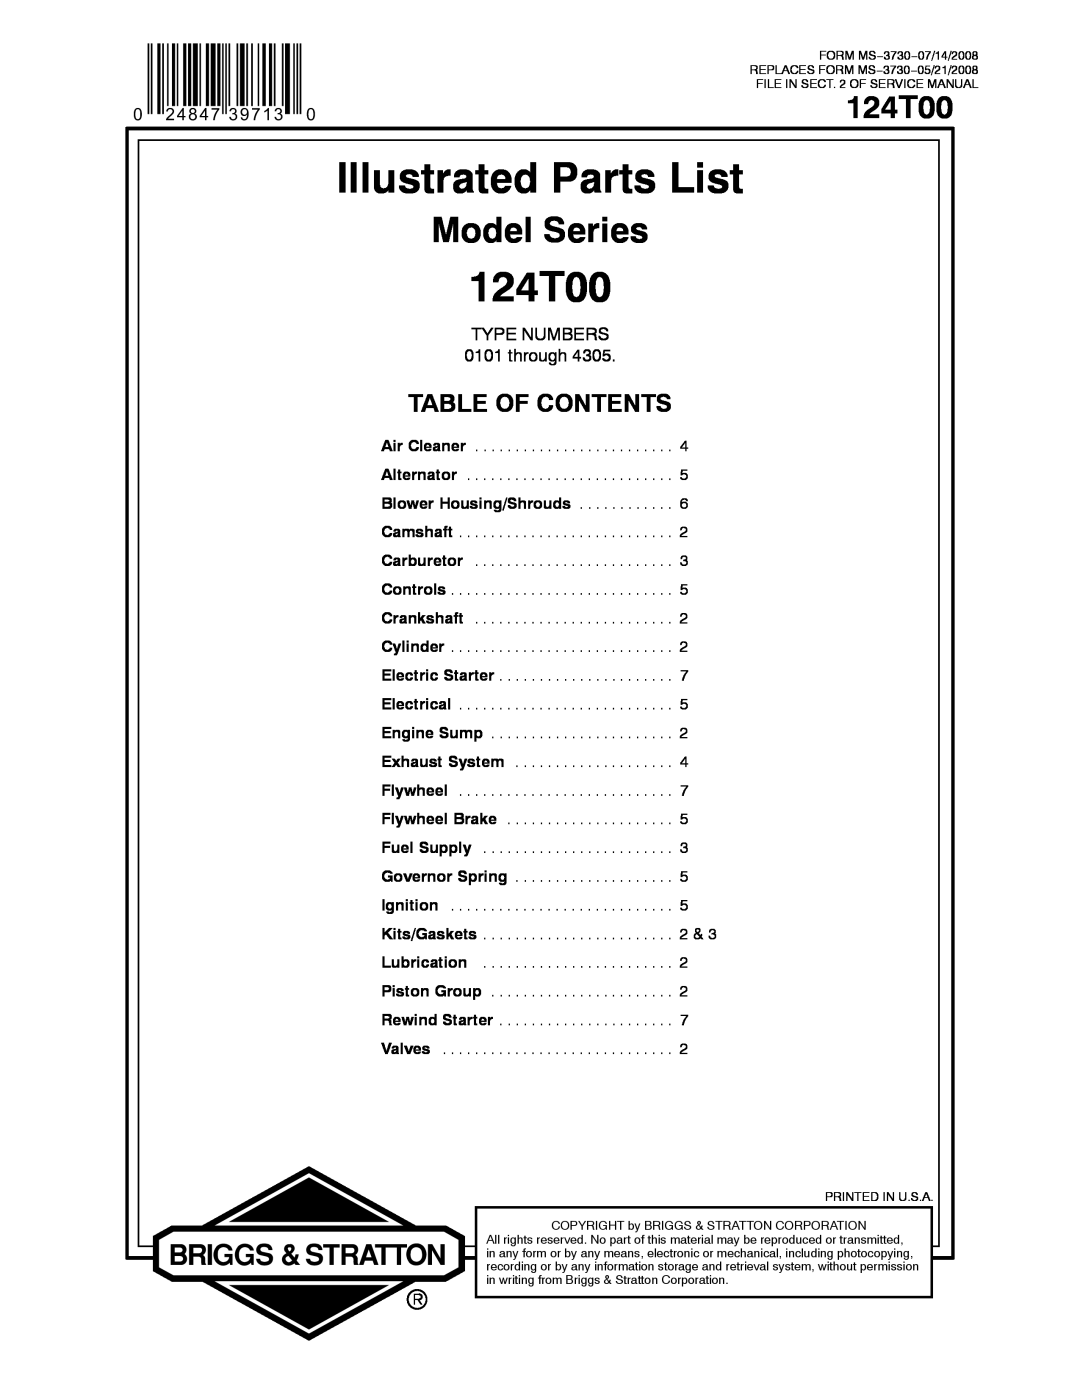 Snapper 124T00 service manual Illustrated Parts List, Model Series, Table Of Contents, TYPE NUMBERS 0101 through 